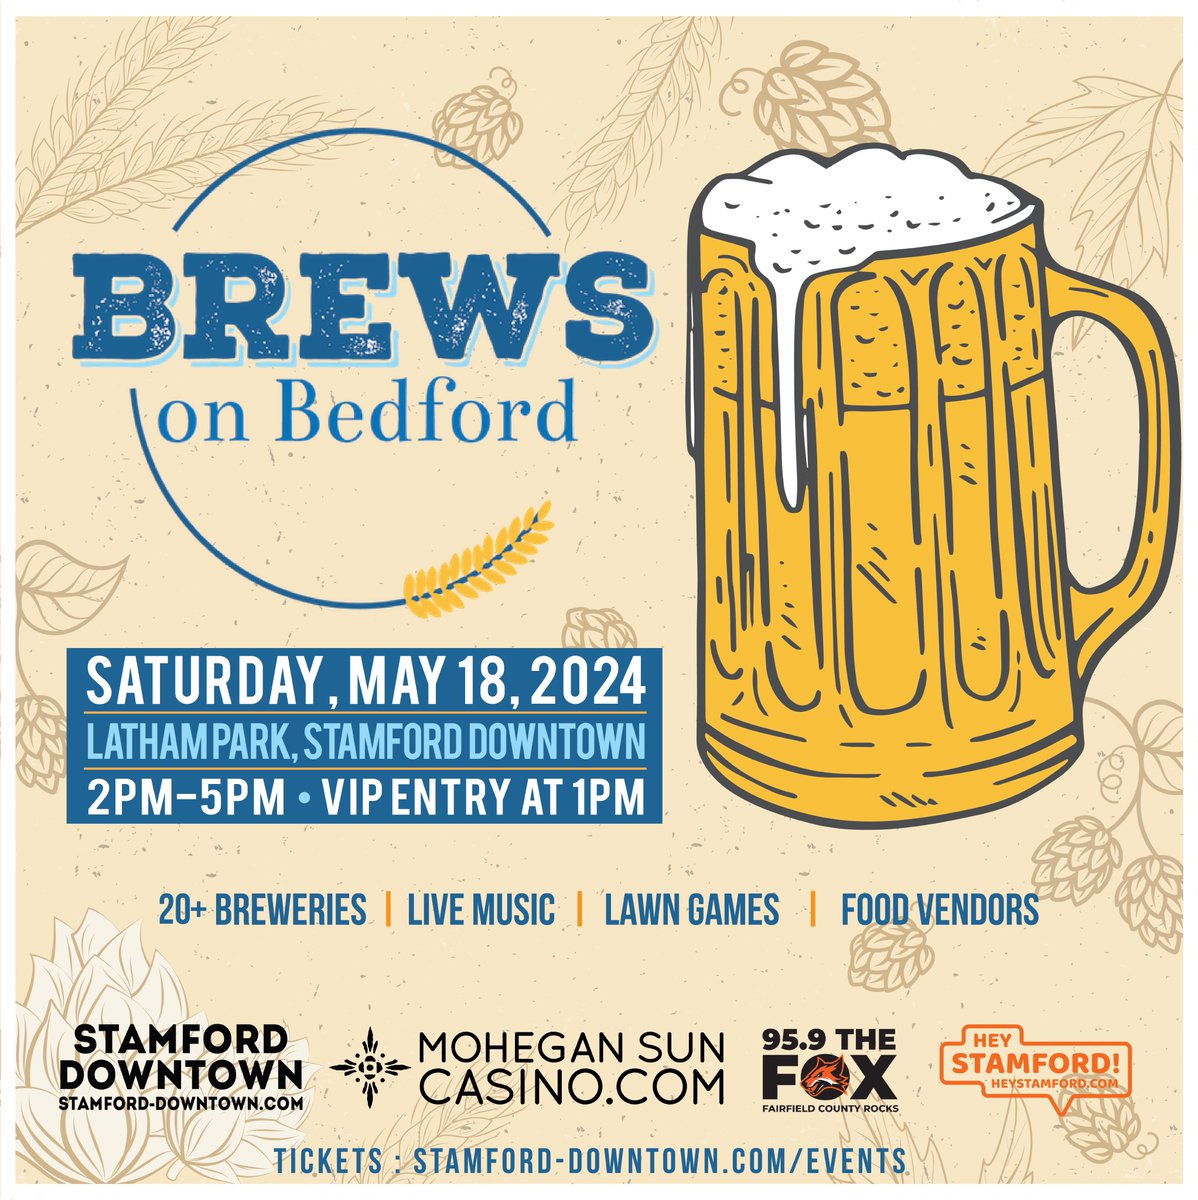 Tickets still available for Brews on Bedford -- this Saturday, May 18! Enjoy sampling from 25 different breweries (and more!) -- food vendors, live music, vendors and more. bit.ly/3TXOM1f